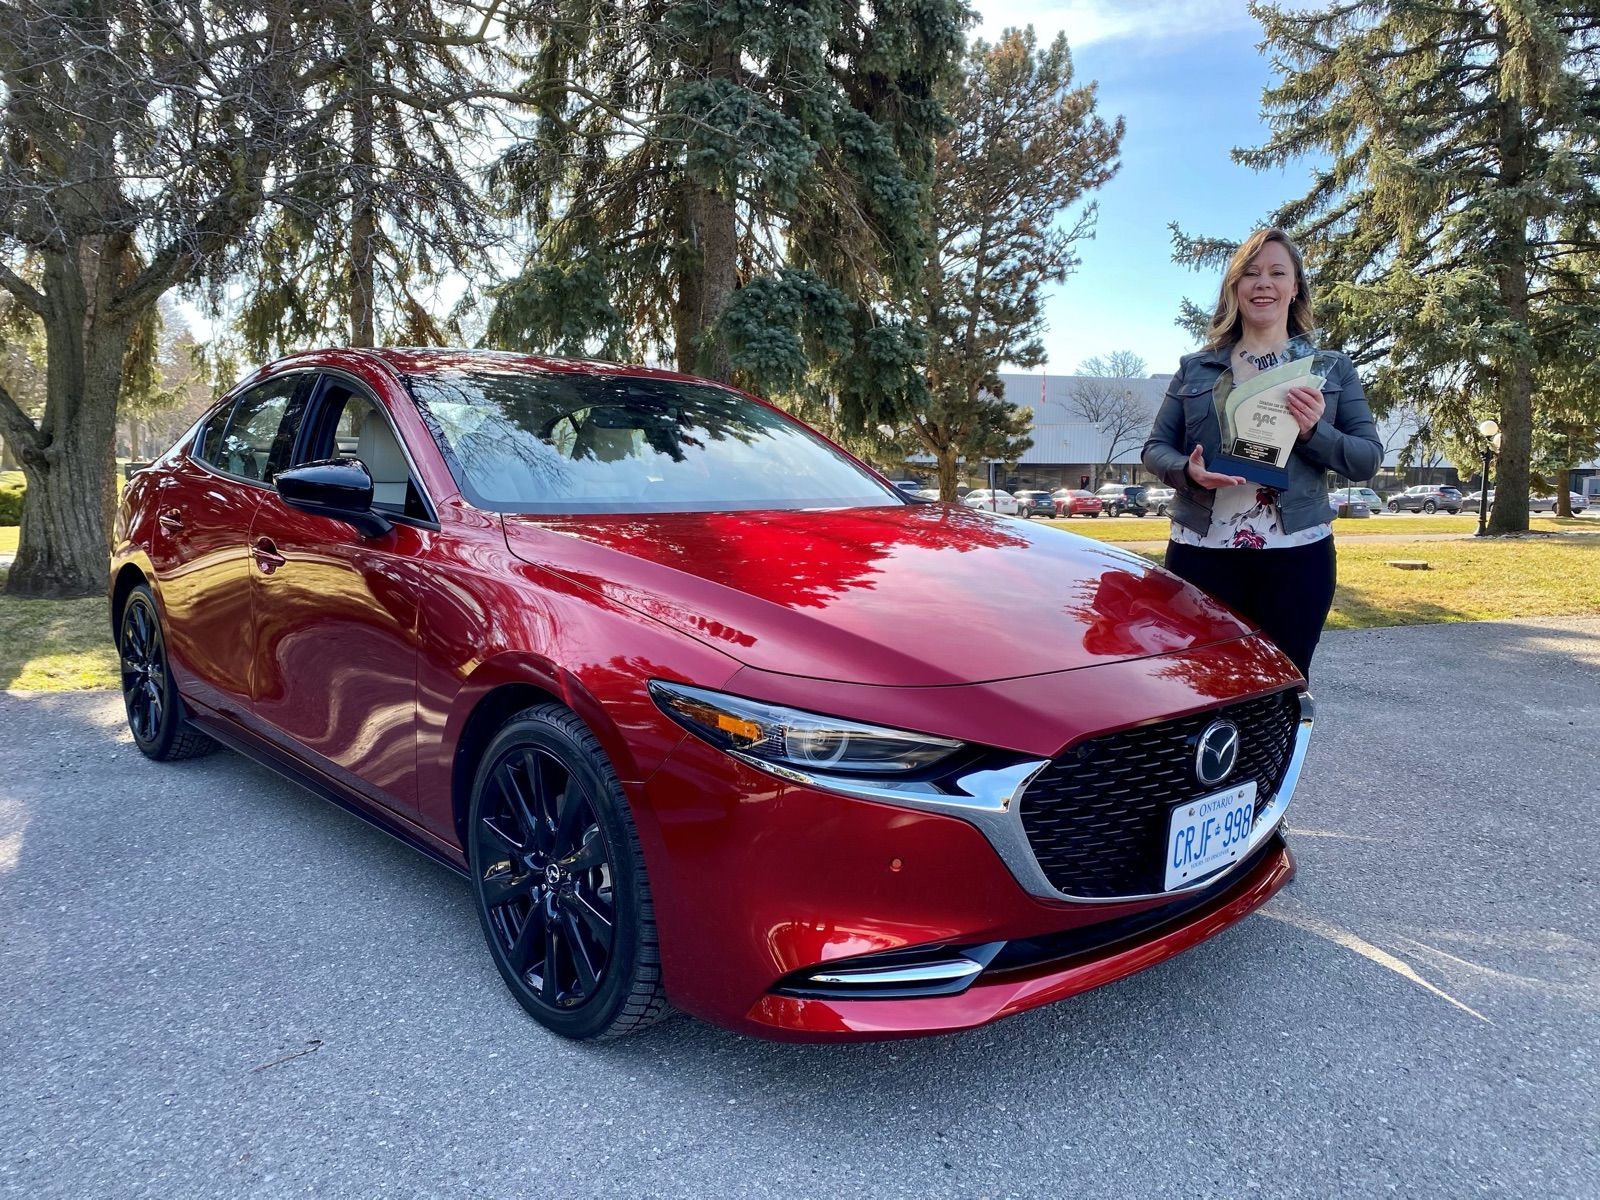 2021 Canadian Car Of The Year Is The Mazda 3, The Only Car To Ever win Canadian Car Of The Year In Consecutive Years